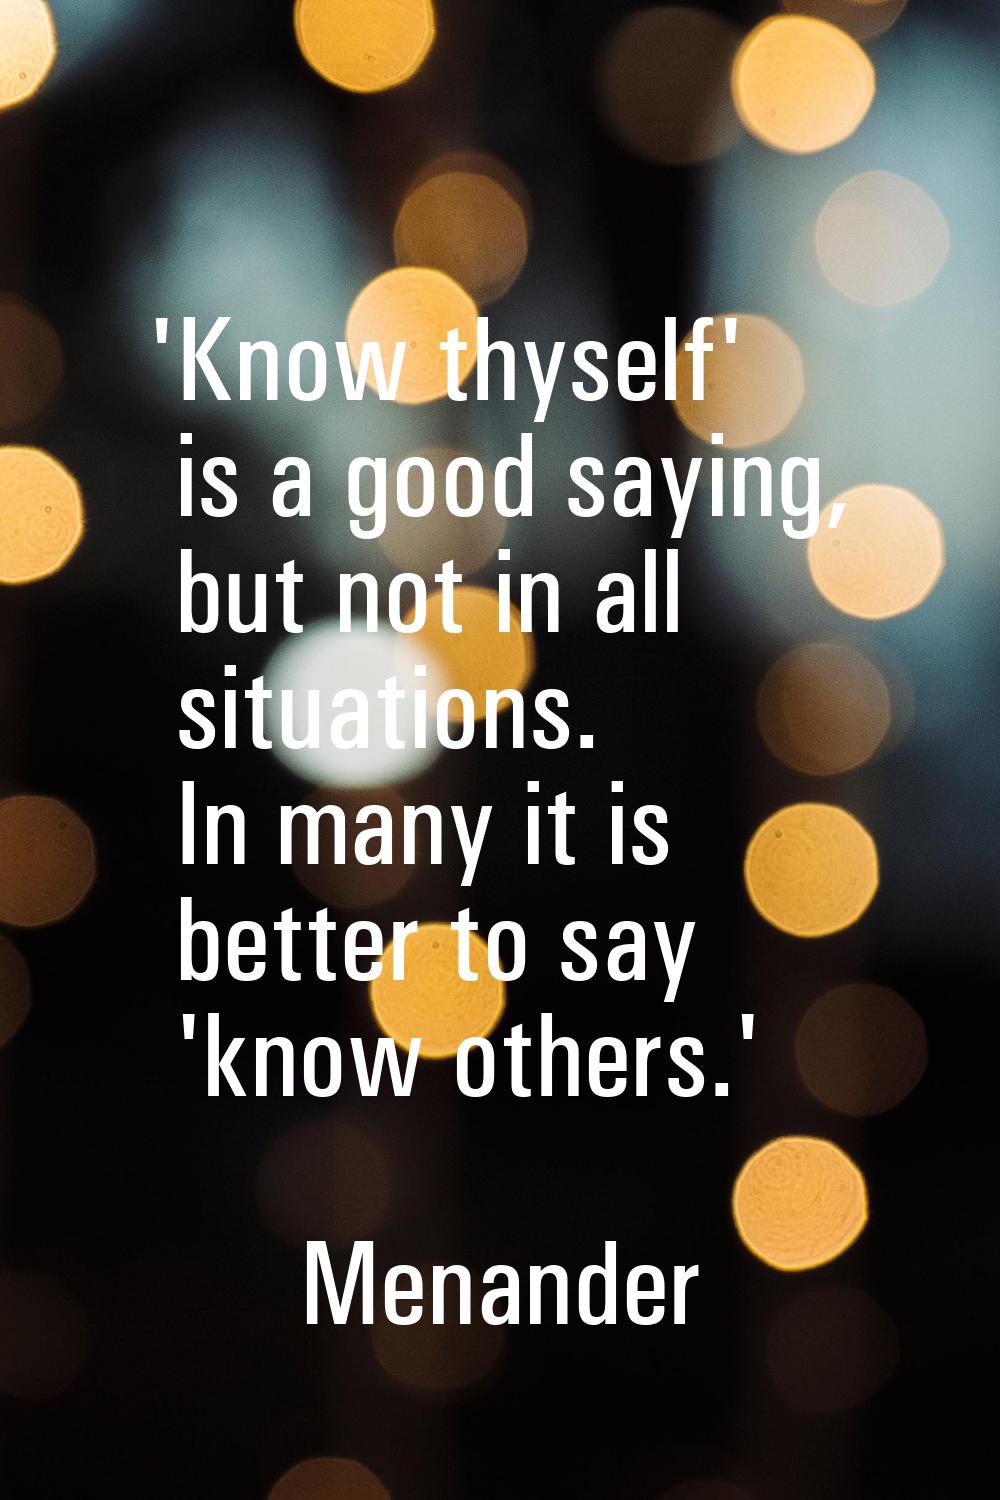 'Know thyself' is a good saying, but not in all situations. In many it is better to say 'know other